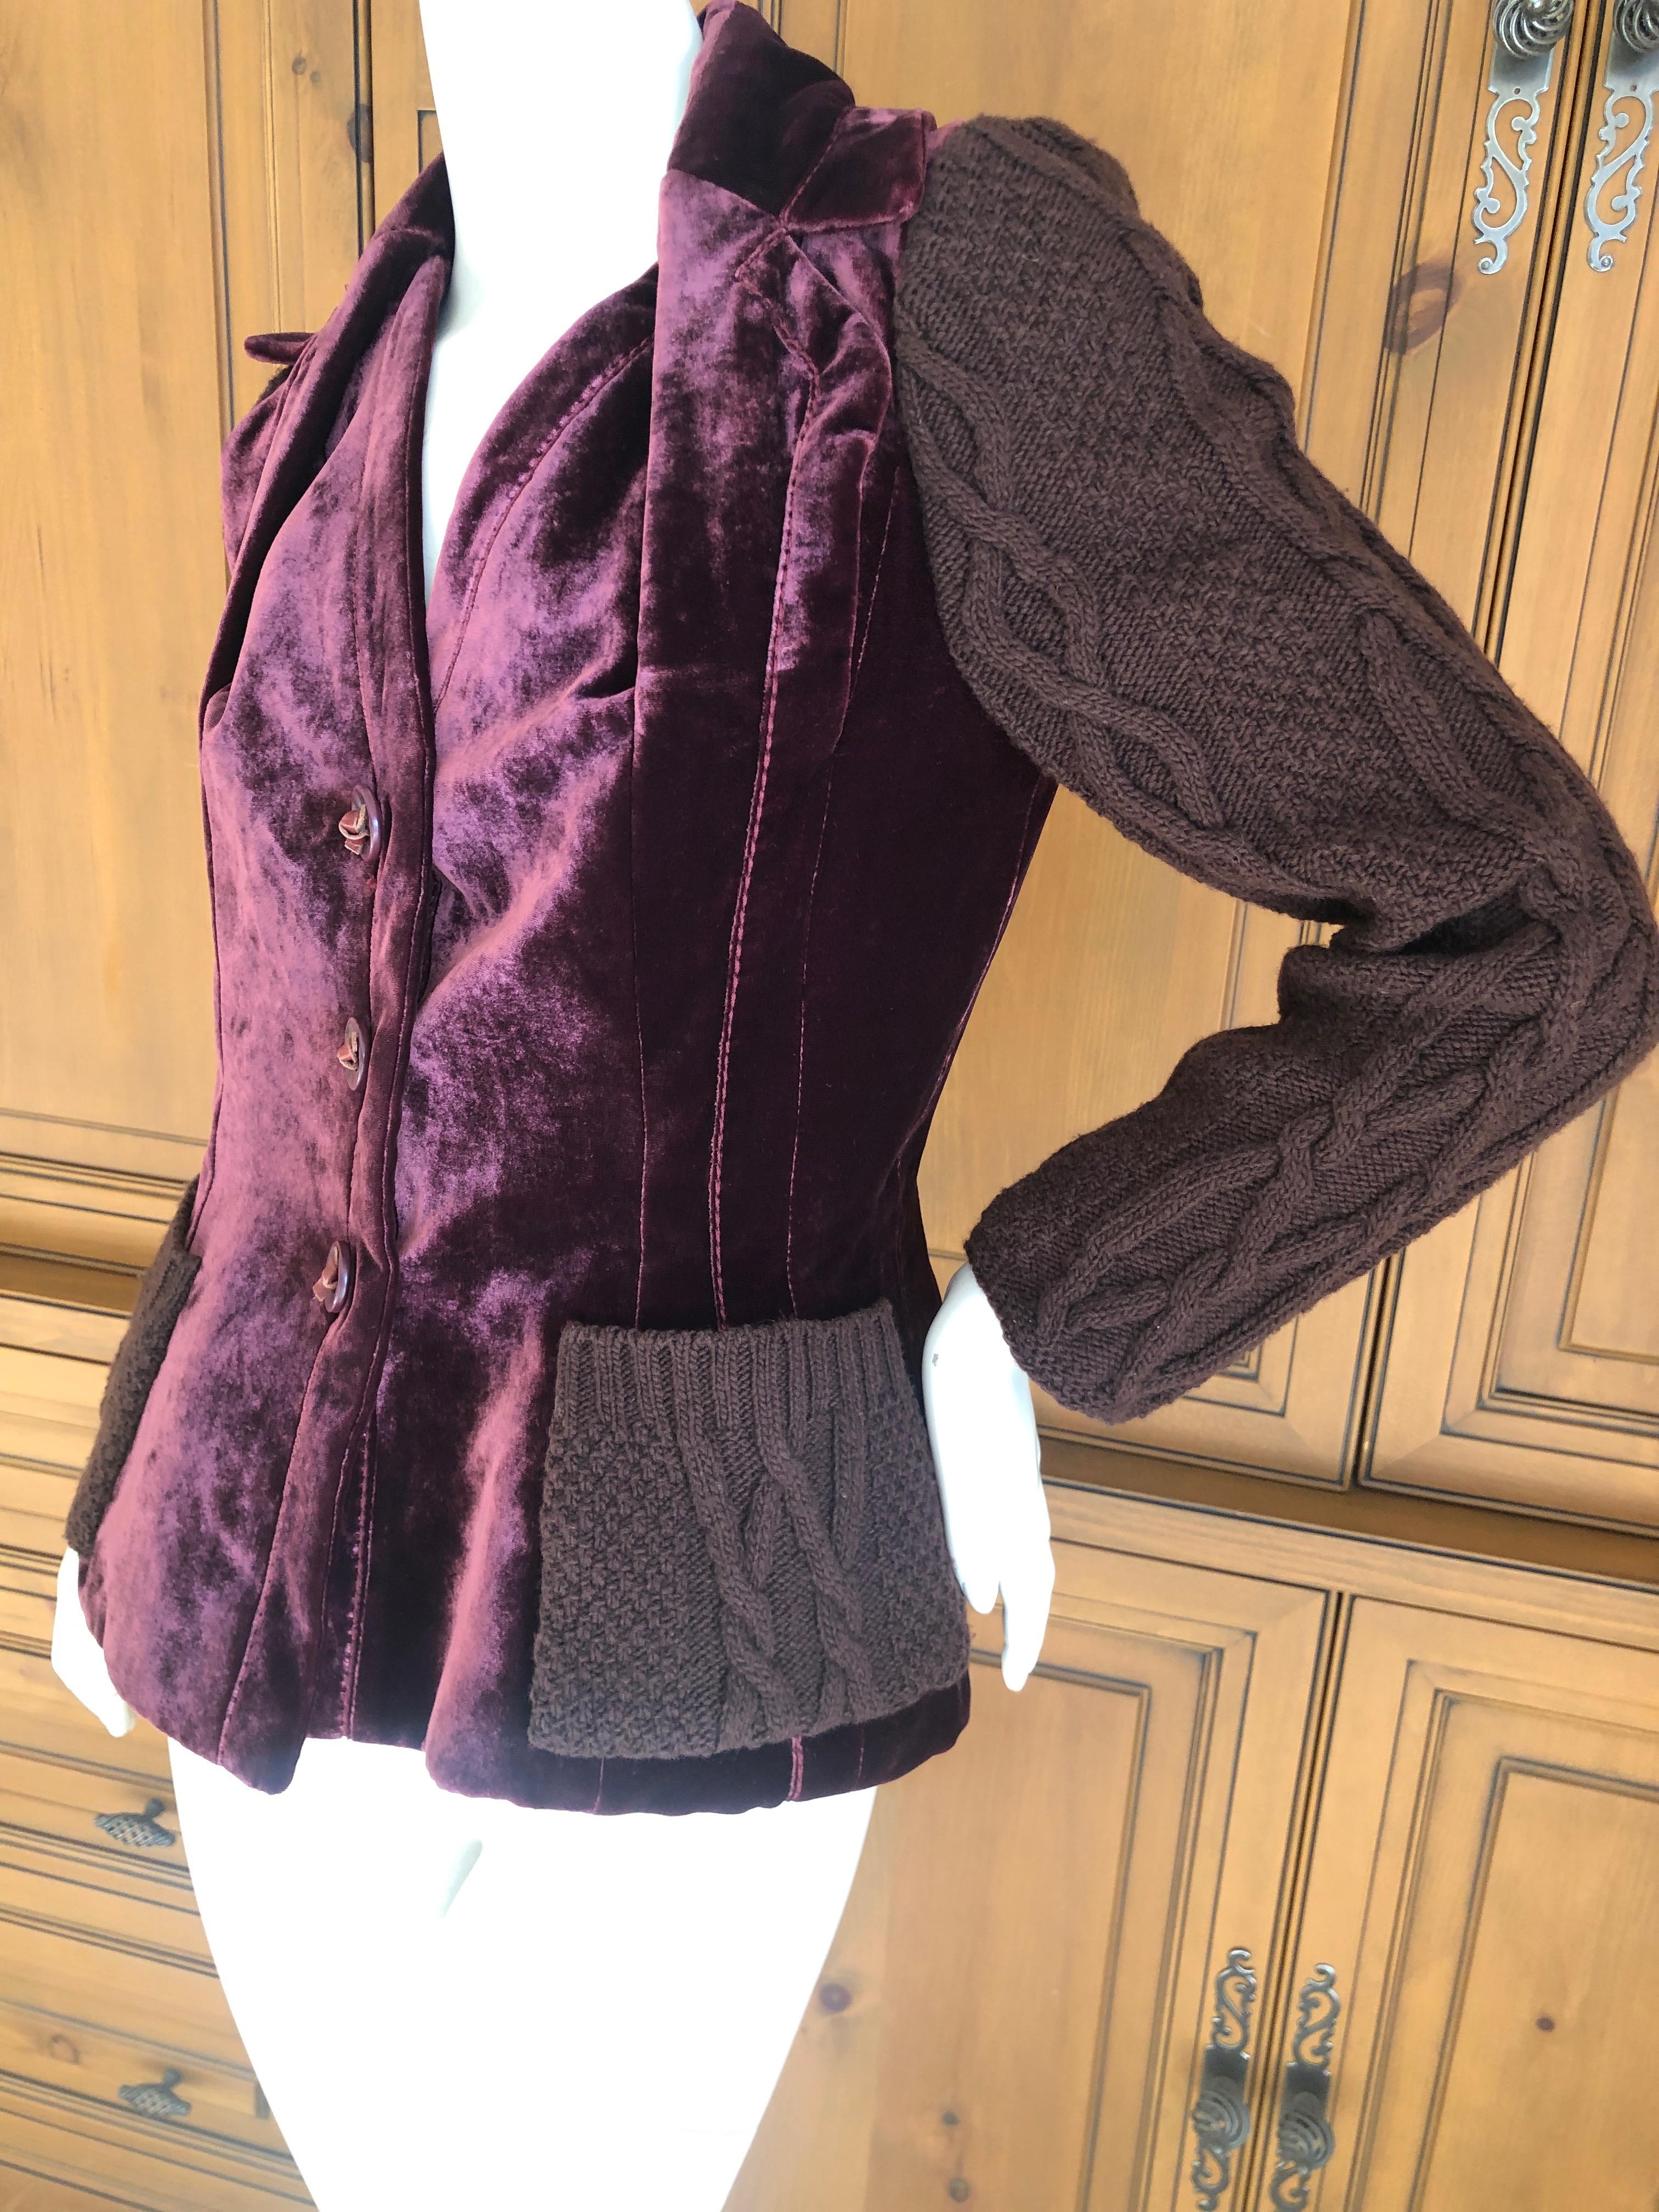 Christian Dior by John Galliano Burgundy Velvet Bar Jacket w Cable Knit Details For Sale 1